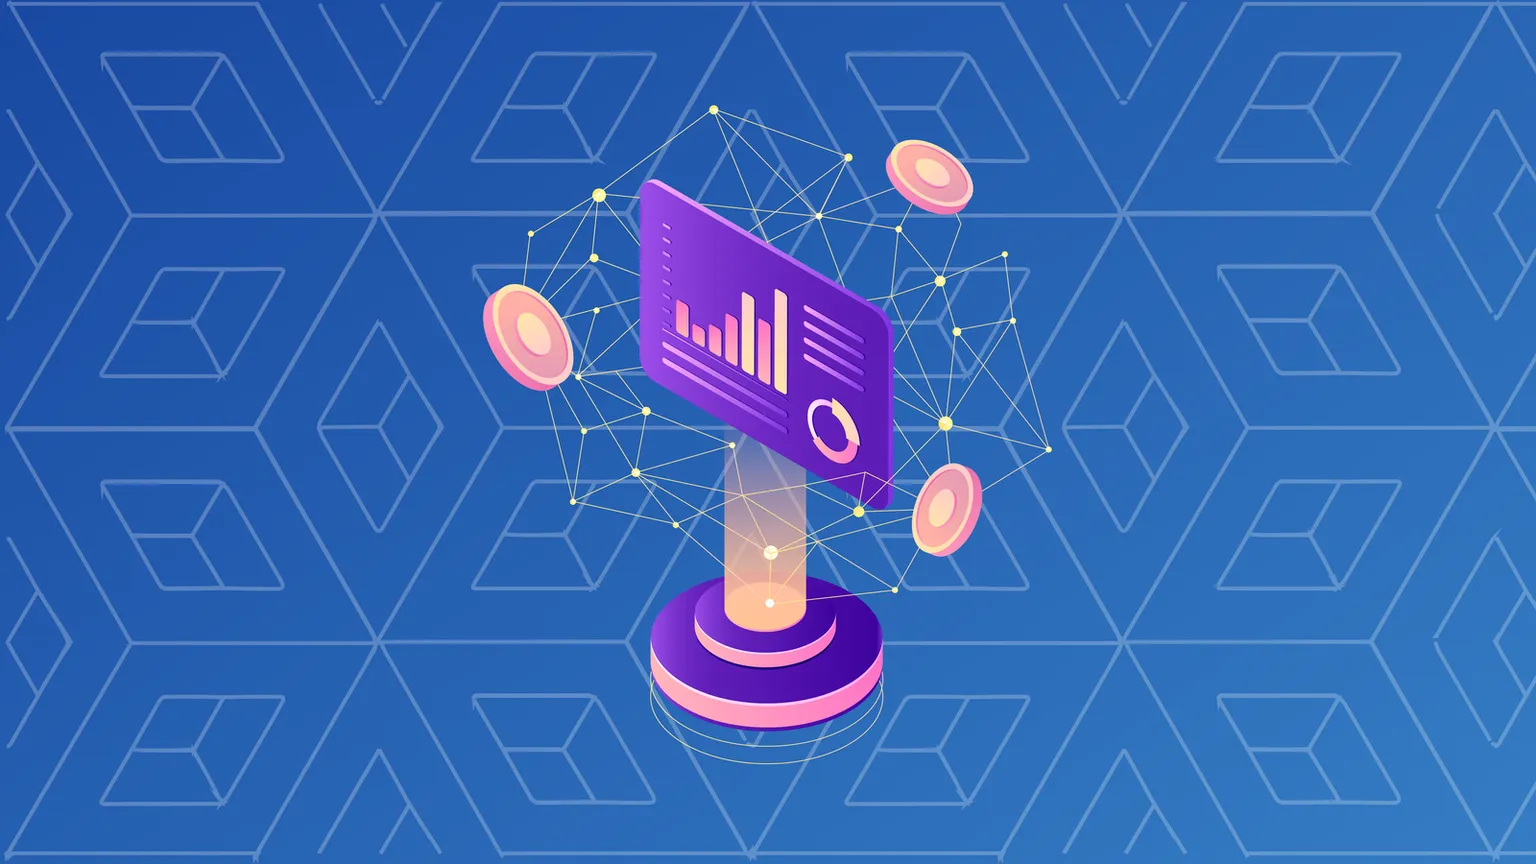 Decentralized finance, or DeFi, is a set of financial services built using smart contracts.